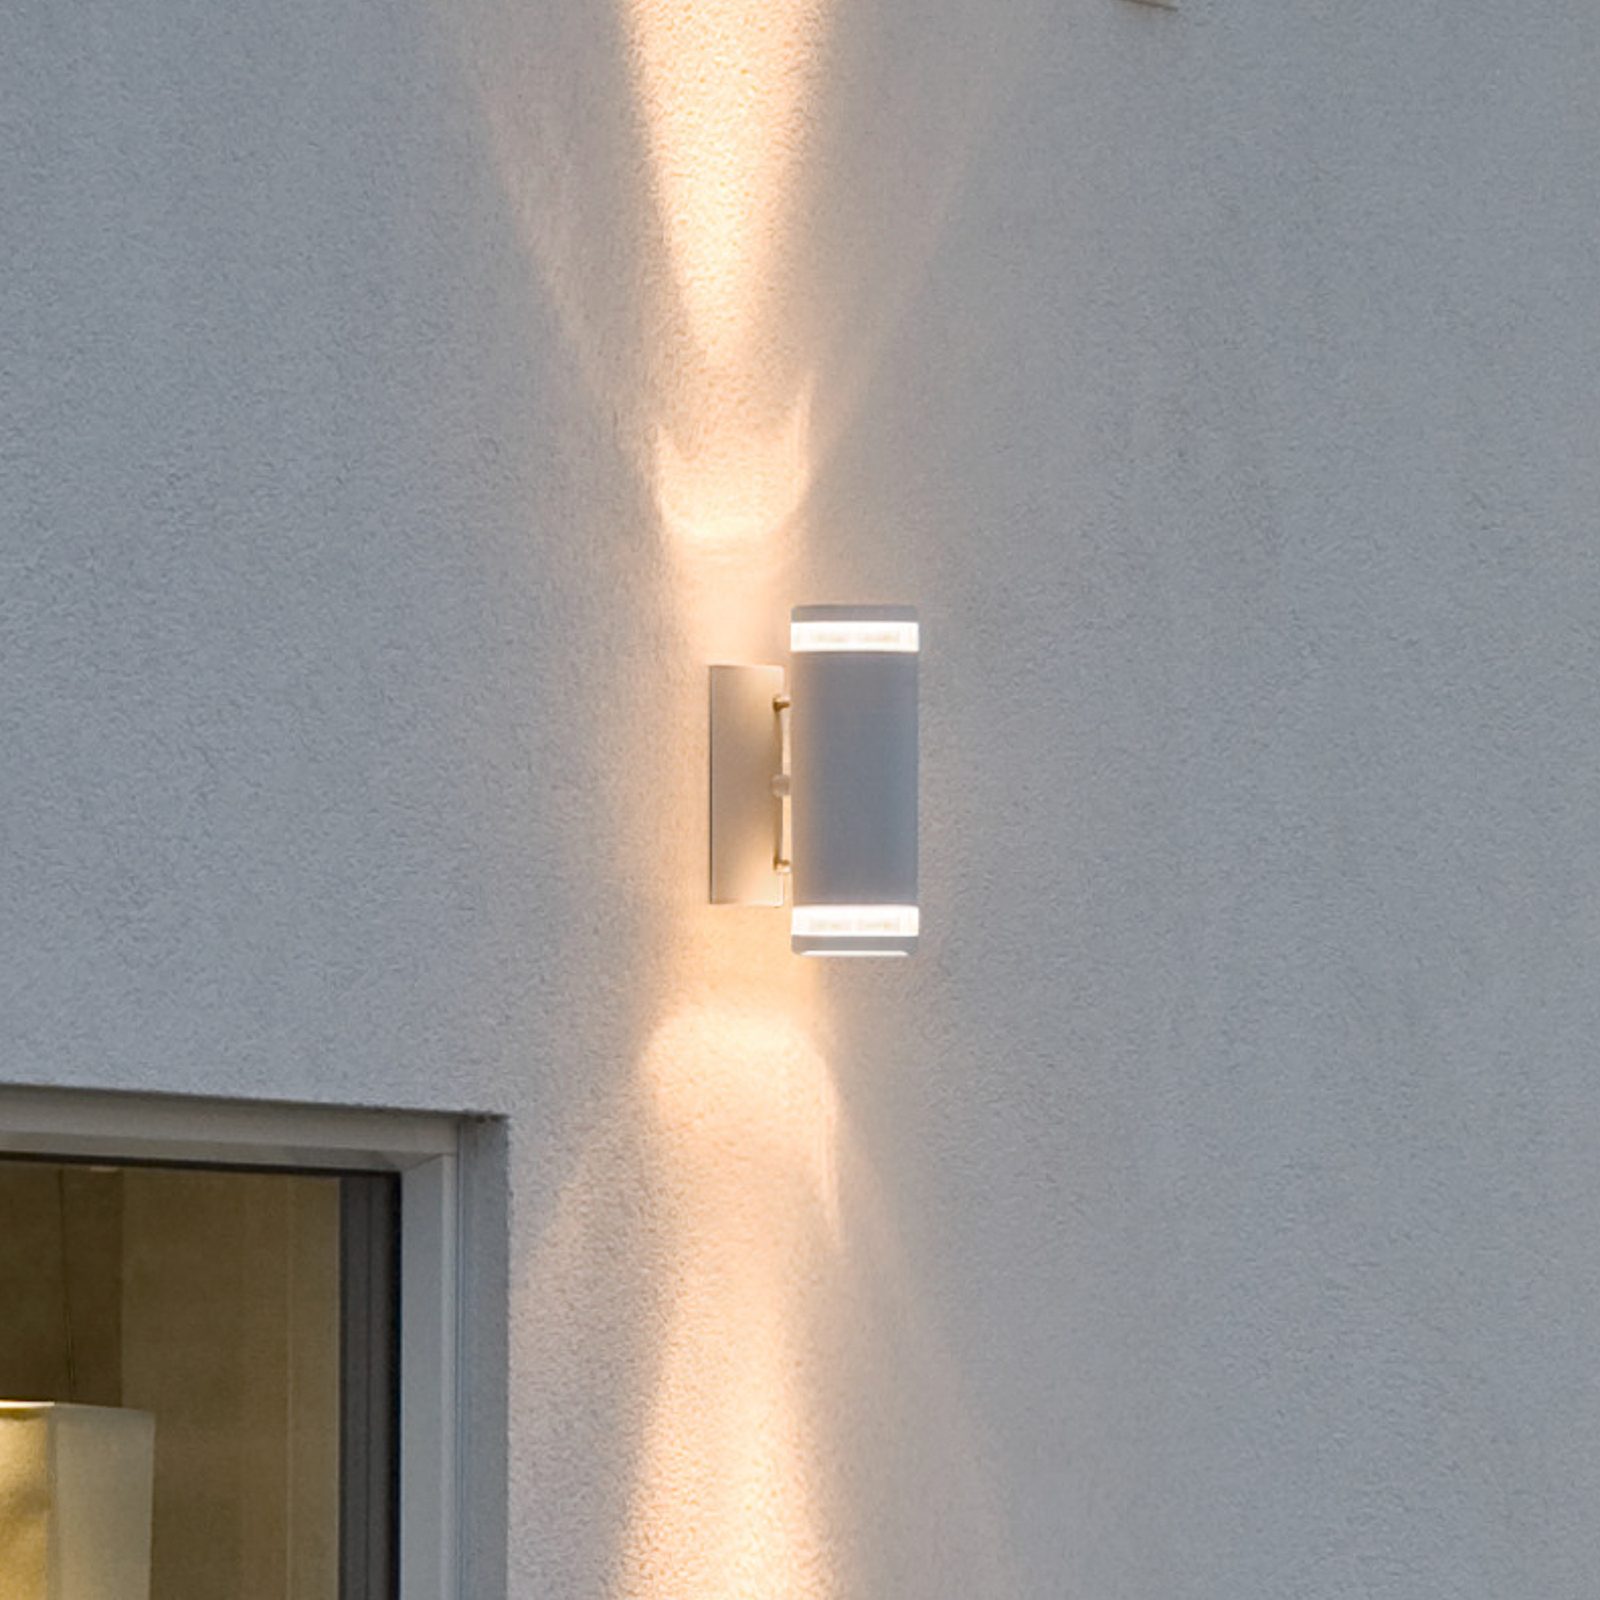 Modena outdoor wall light with slit, 2-bulb, white